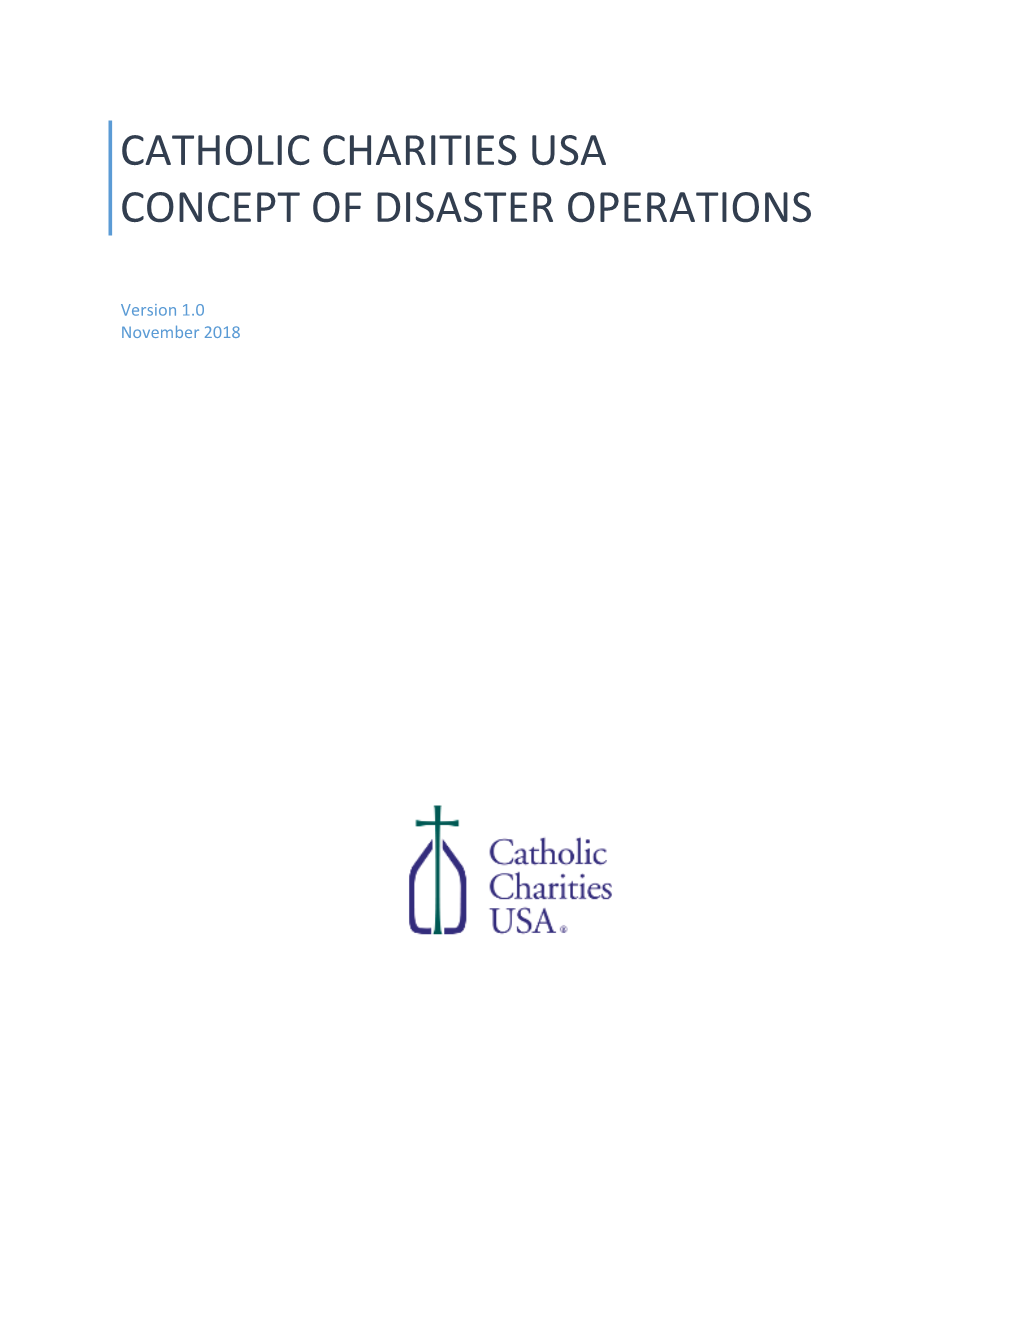 Catholic Charities Usa Concept of Disaster Operations